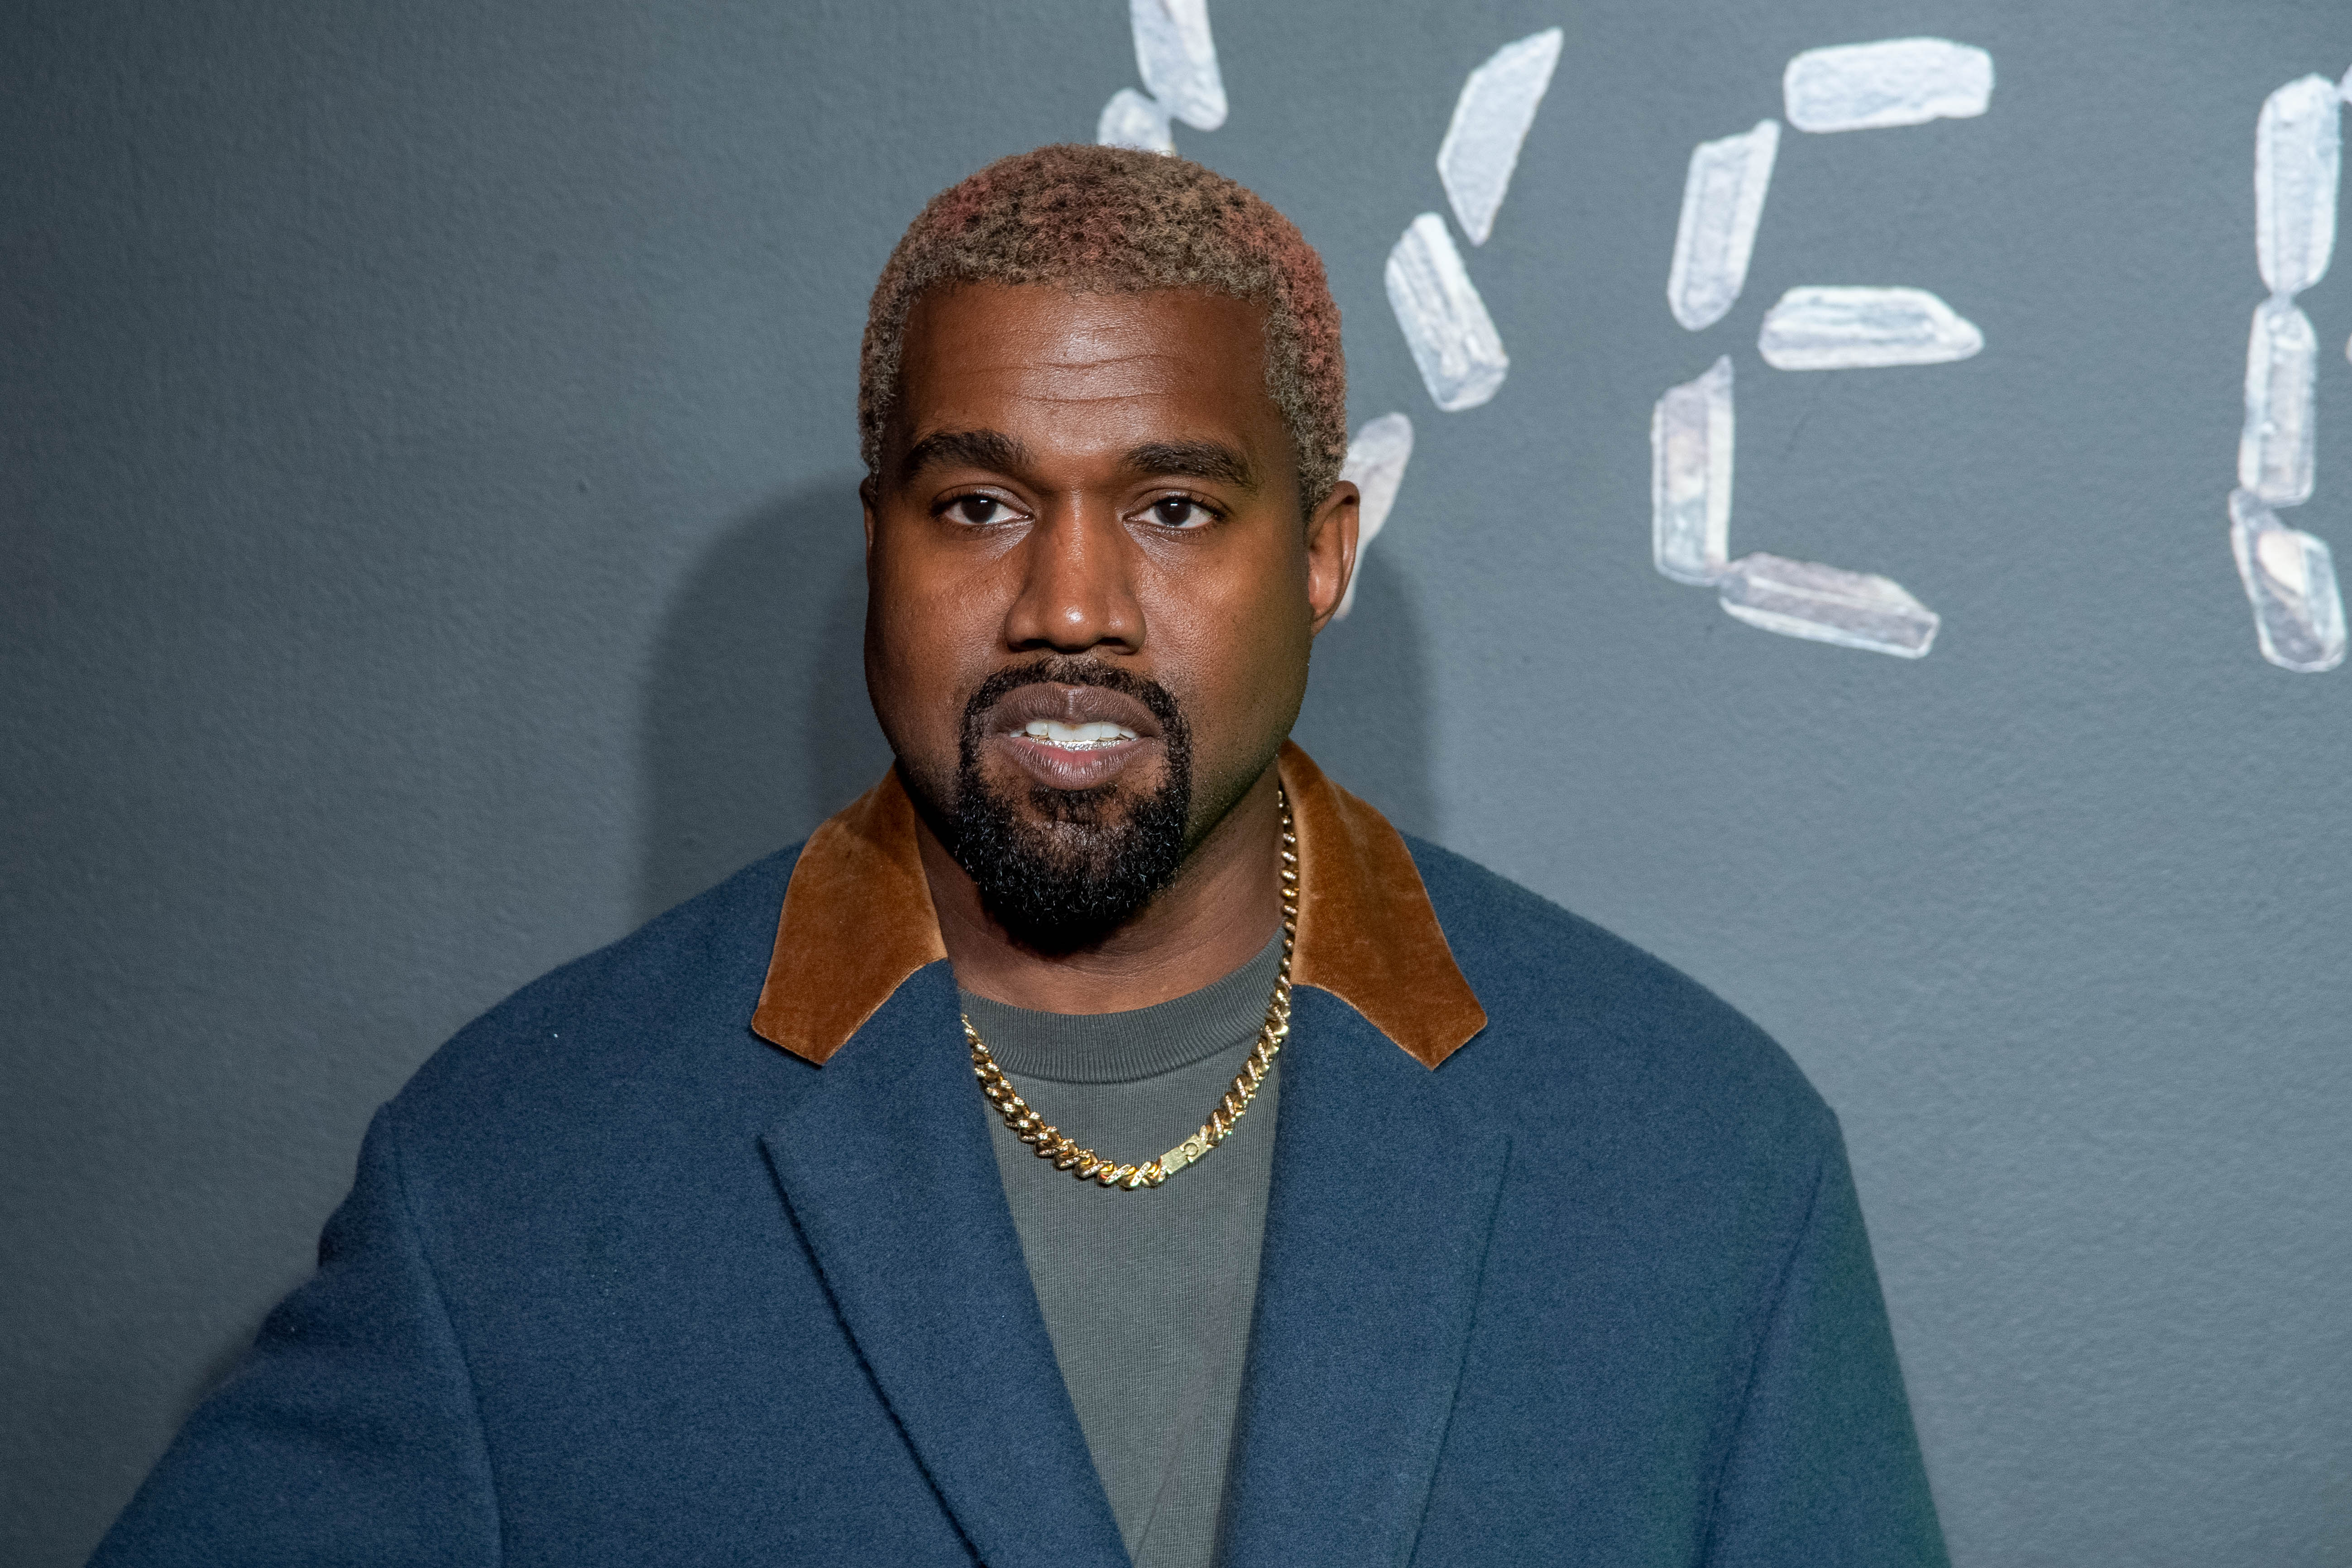 Kanye West at the Versace fall 2019 fashion show on Dec. 02, 2018 in New York City | Photo: Getty Images 